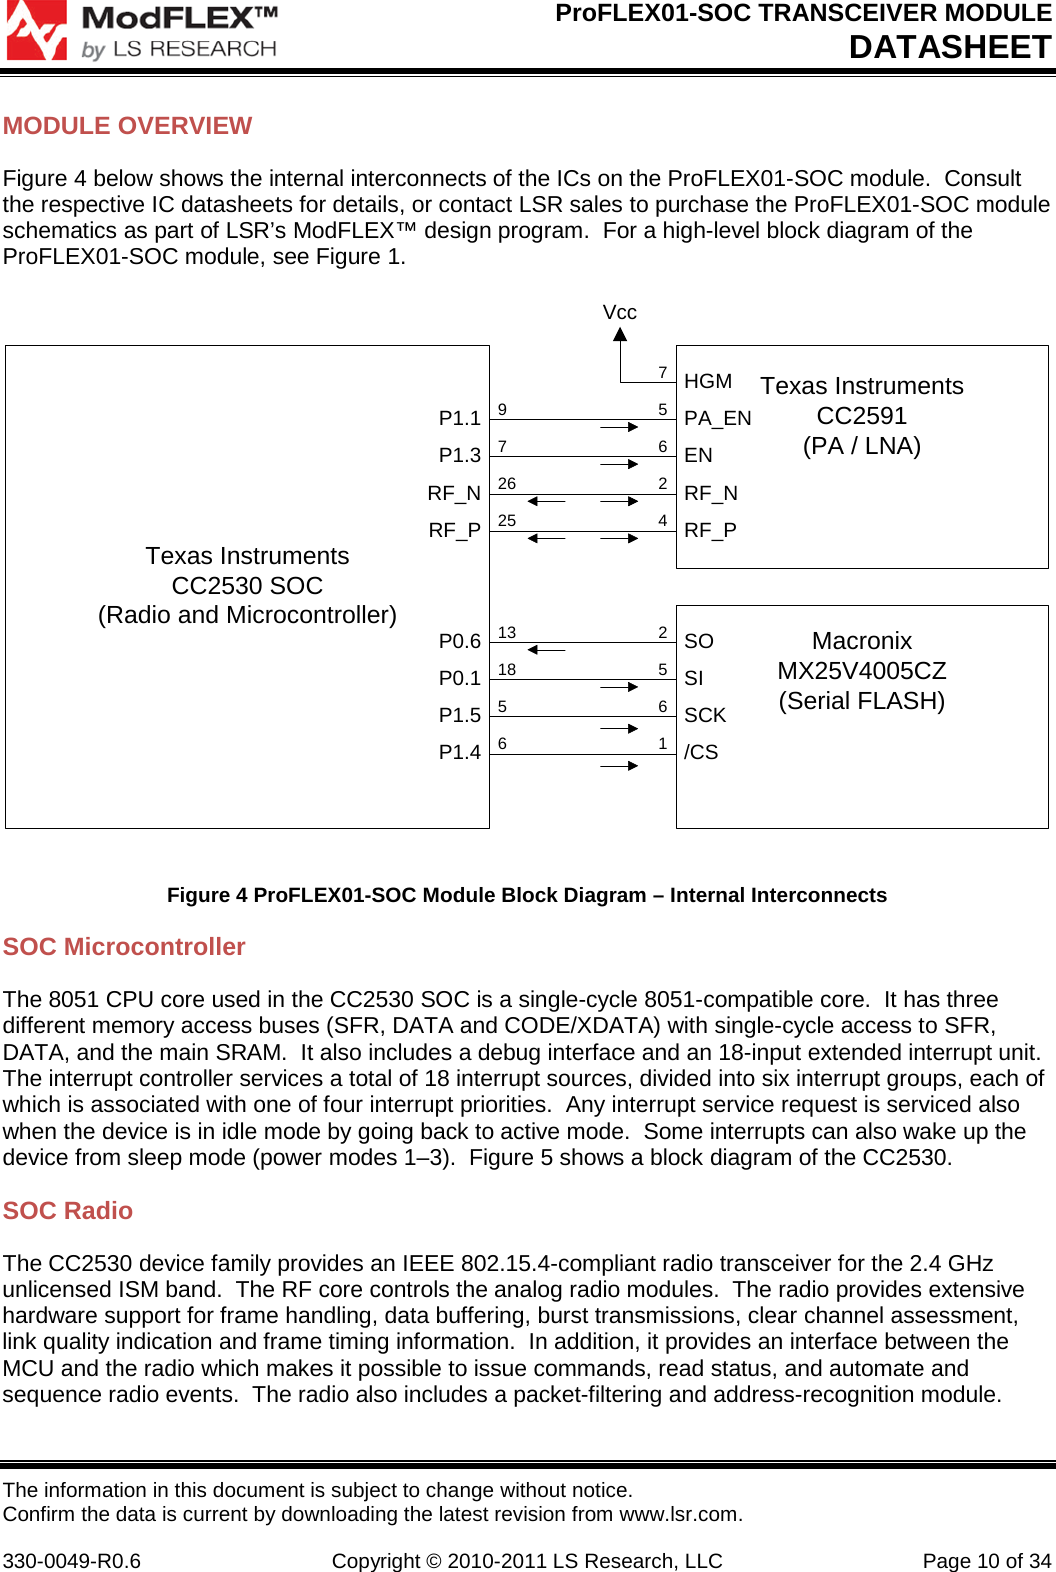 ProFLEX01-SOC TRANSCEIVER MODULE DATASHEET The information in this document is subject to change without notice. Confirm the data is current by downloading the latest revision from www.lsr.com.  330-0049-R0.6 Copyright © 2010-2011 LS Research, LLC Page 10 of 34 MODULE OVERVIEW Figure 4 below shows the internal interconnects of the ICs on the ProFLEX01-SOC module.  Consult the respective IC datasheets for details, or contact LSR sales to purchase the ProFLEX01-SOC module schematics as part of LSR’s ModFLEX™ design program.  For a high-level block diagram of the ProFLEX01-SOC module, see Figure 1. Texas InstrumentsCC2530 SOC(Radio and Microcontroller)Texas InstrumentsCC2591(PA / LNA)MacronixMX25V4005CZ(Serial FLASH)SOSISCK/CSP0.6P0.1P1.5P1.4PA_ENENP1.1P1.3HGMVccRF_NRF_PRF_NRF_P972625131856256156247 Figure 4 ProFLEX01-SOC Module Block Diagram – Internal Interconnects SOC Microcontroller The 8051 CPU core used in the CC2530 SOC is a single-cycle 8051-compatible core.  It has three different memory access buses (SFR, DATA and CODE/XDATA) with single-cycle access to SFR, DATA, and the main SRAM.  It also includes a debug interface and an 18-input extended interrupt unit.  The interrupt controller services a total of 18 interrupt sources, divided into six interrupt groups, each of which is associated with one of four interrupt priorities.  Any interrupt service request is serviced also when the device is in idle mode by going back to active mode.  Some interrupts can also wake up the device from sleep mode (power modes 1–3).  Figure 5 shows a block diagram of the CC2530. SOC Radio The CC2530 device family provides an IEEE 802.15.4-compliant radio transceiver for the 2.4 GHz unlicensed ISM band.  The RF core controls the analog radio modules.  The radio provides extensive hardware support for frame handling, data buffering, burst transmissions, clear channel assessment, link quality indication and frame timing information.  In addition, it provides an interface between the MCU and the radio which makes it possible to issue commands, read status, and automate and sequence radio events.  The radio also includes a packet-filtering and address-recognition module. 